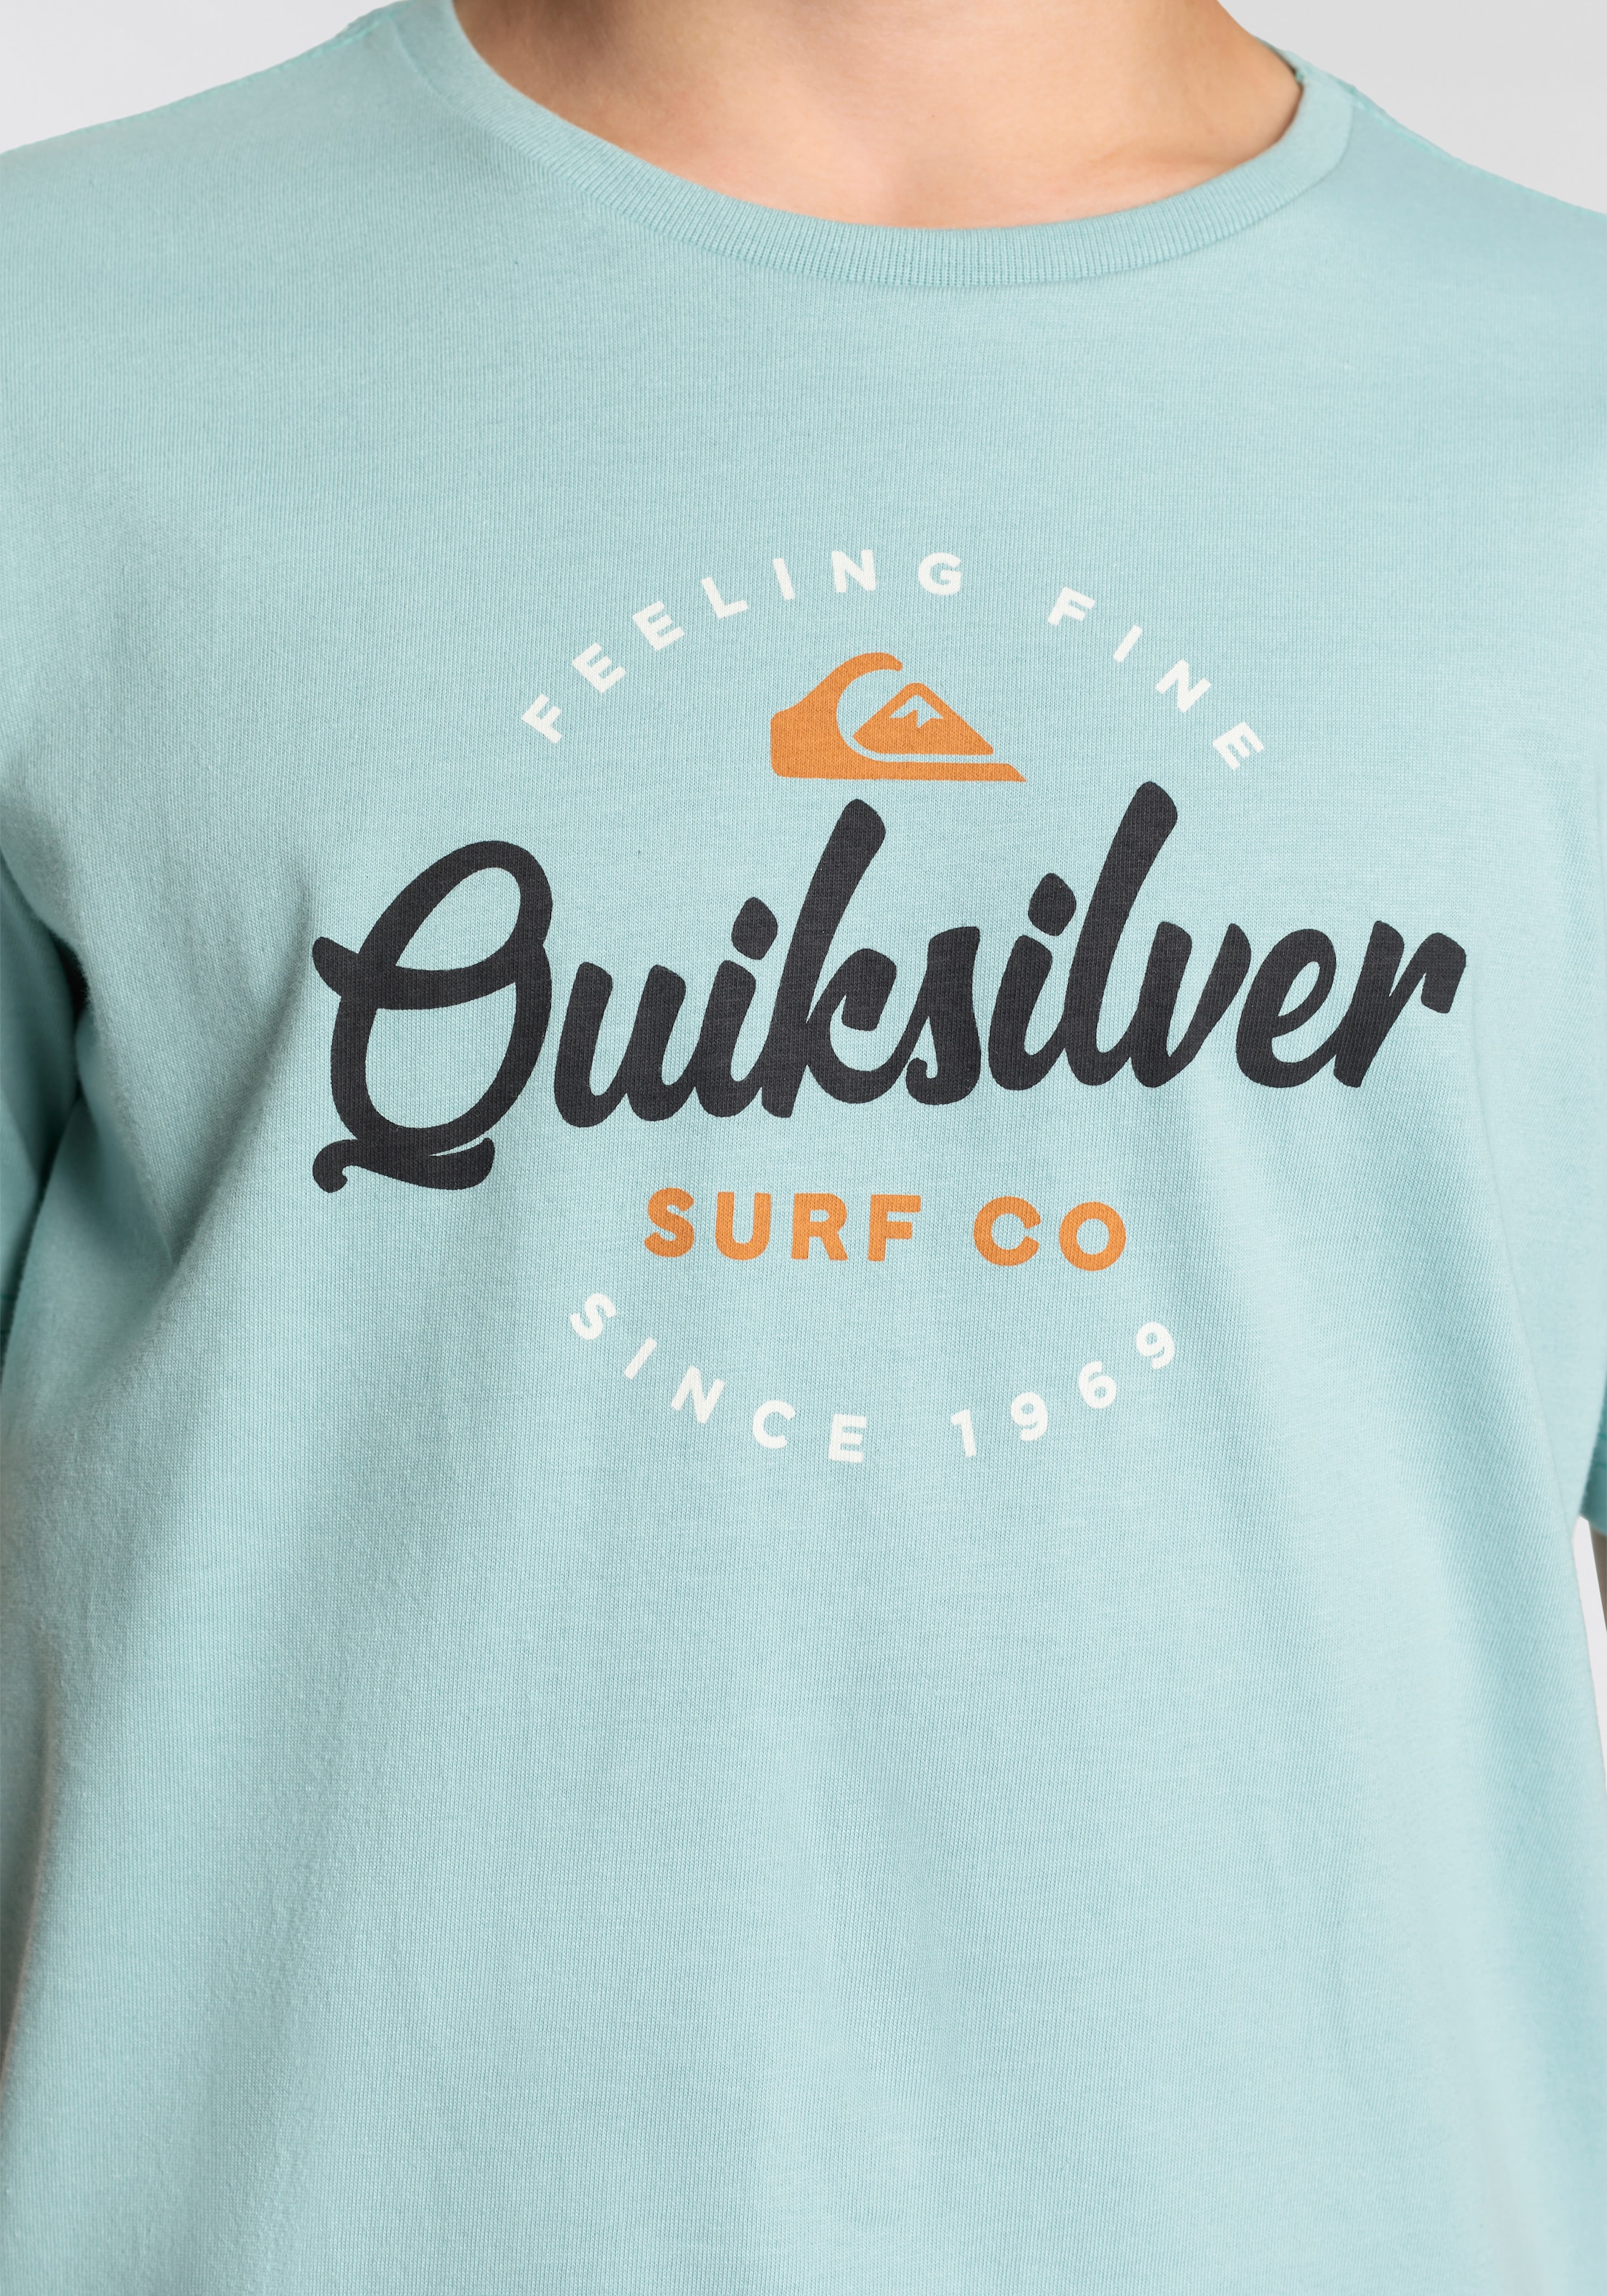 Quiksilver T-Shirt »ARCHICAMO PACK SHORT SLEEVE TEE YOUTH - für Kinder«